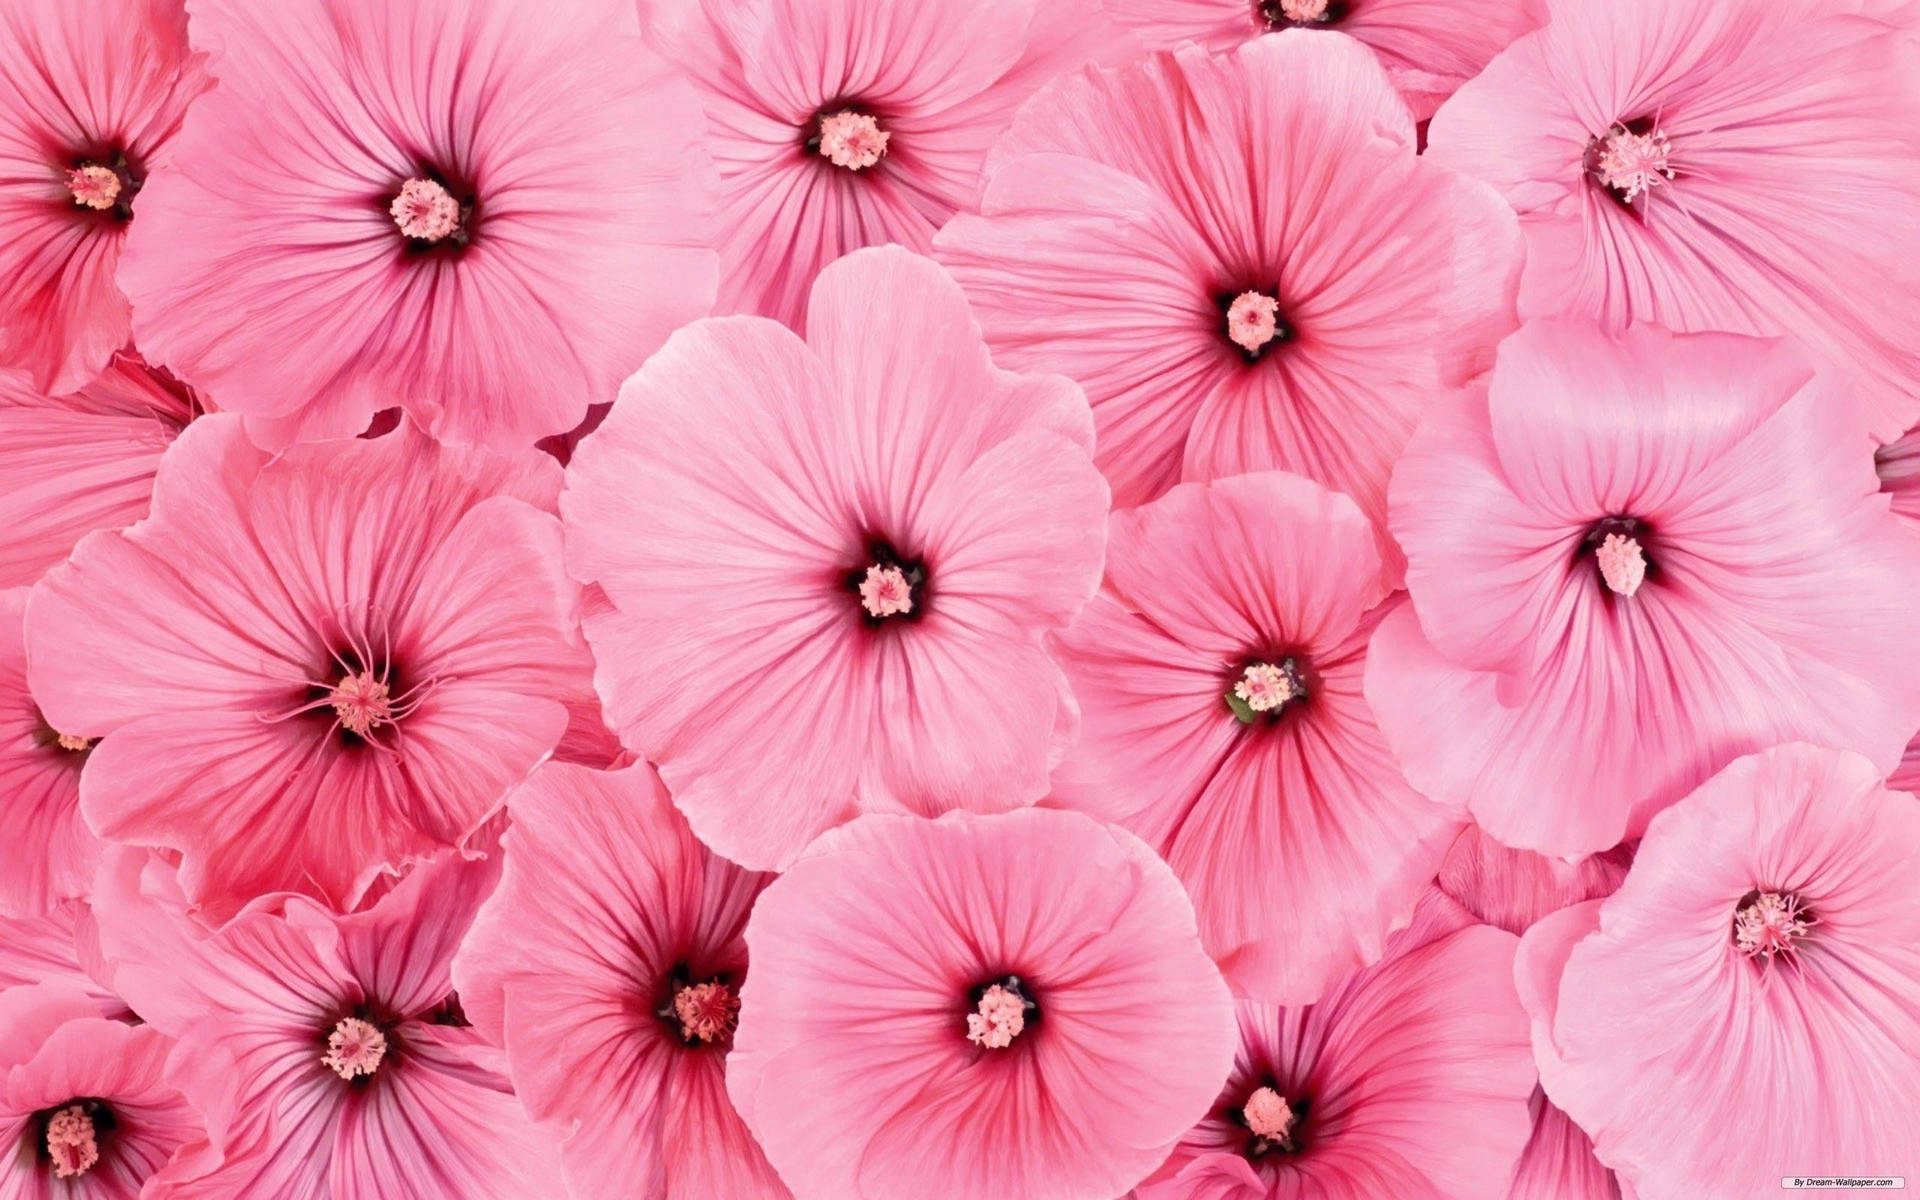 Cute Pink Flower Blooms Of Rose Mallows Background